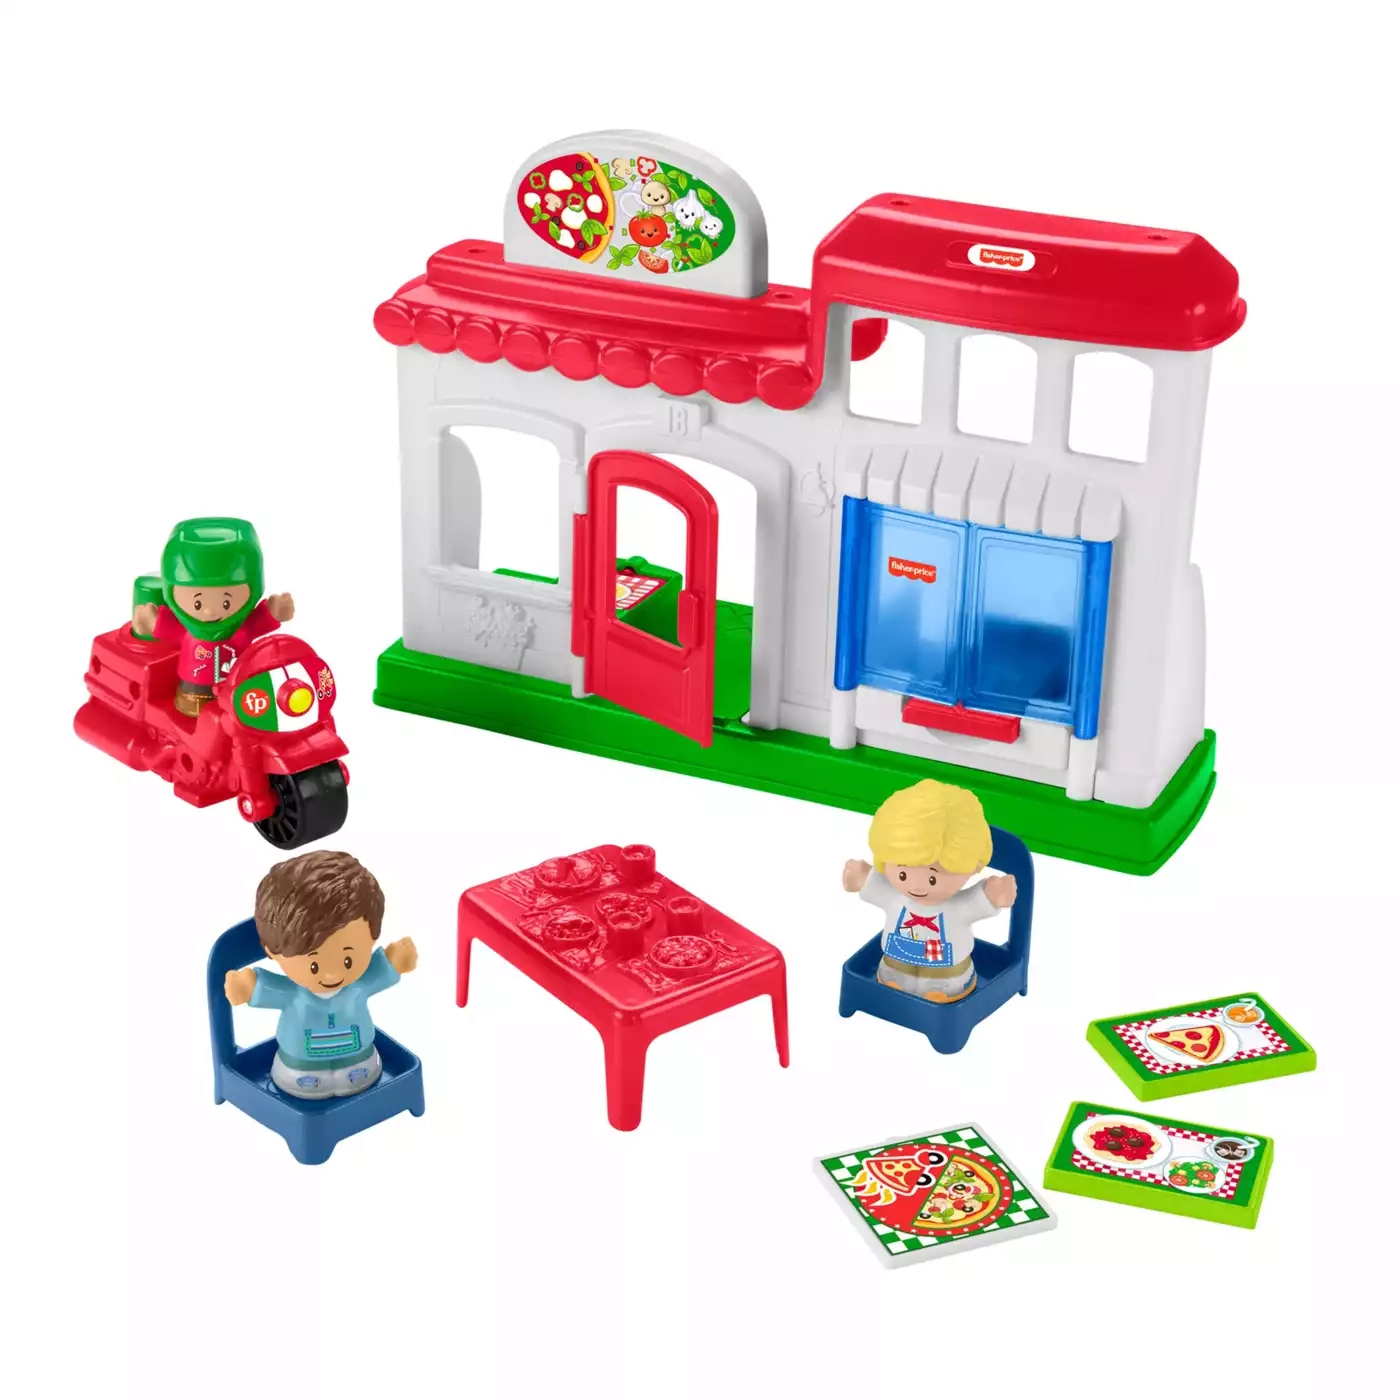 Pizza-Lieferservice Spielset Fisher Price 2000581328201 1